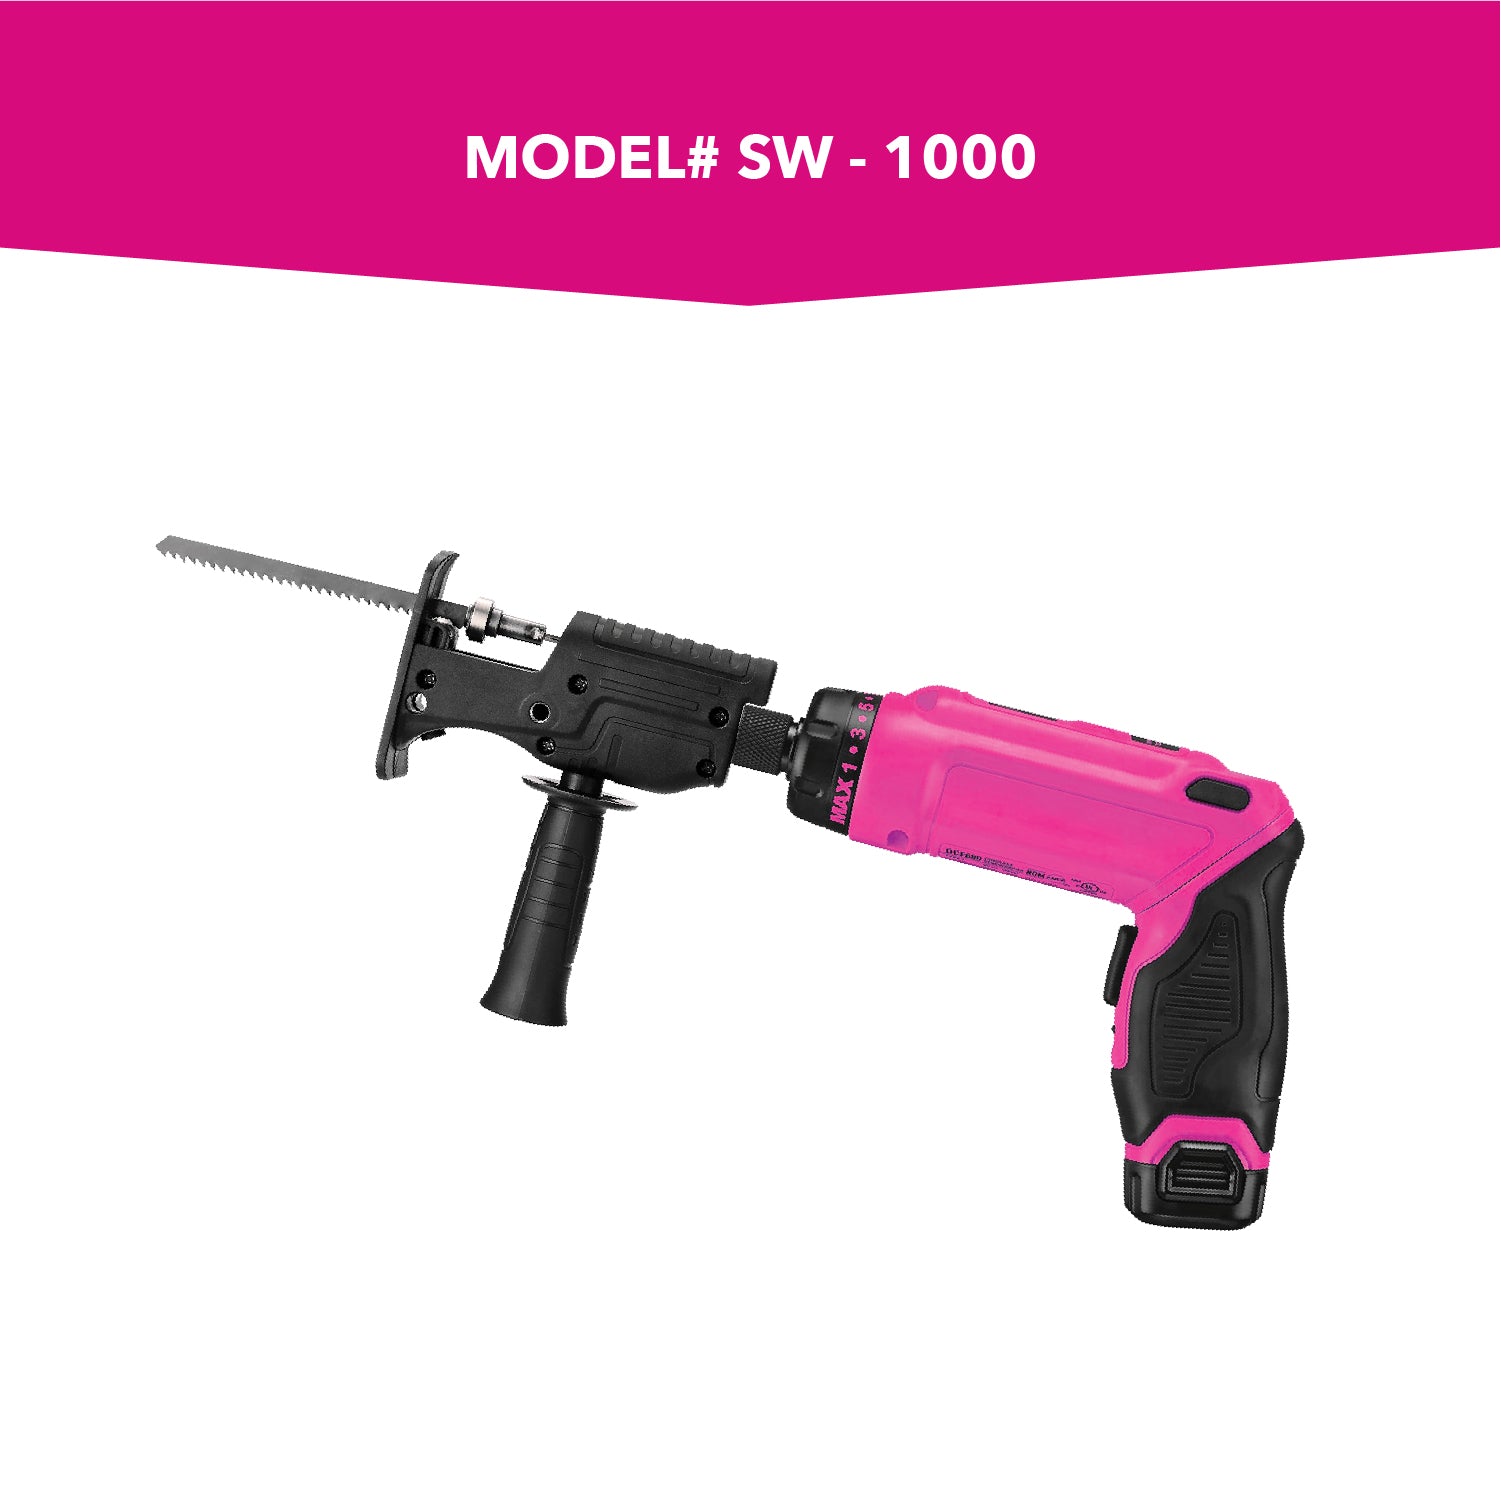 drywall saw cutter adapter product image